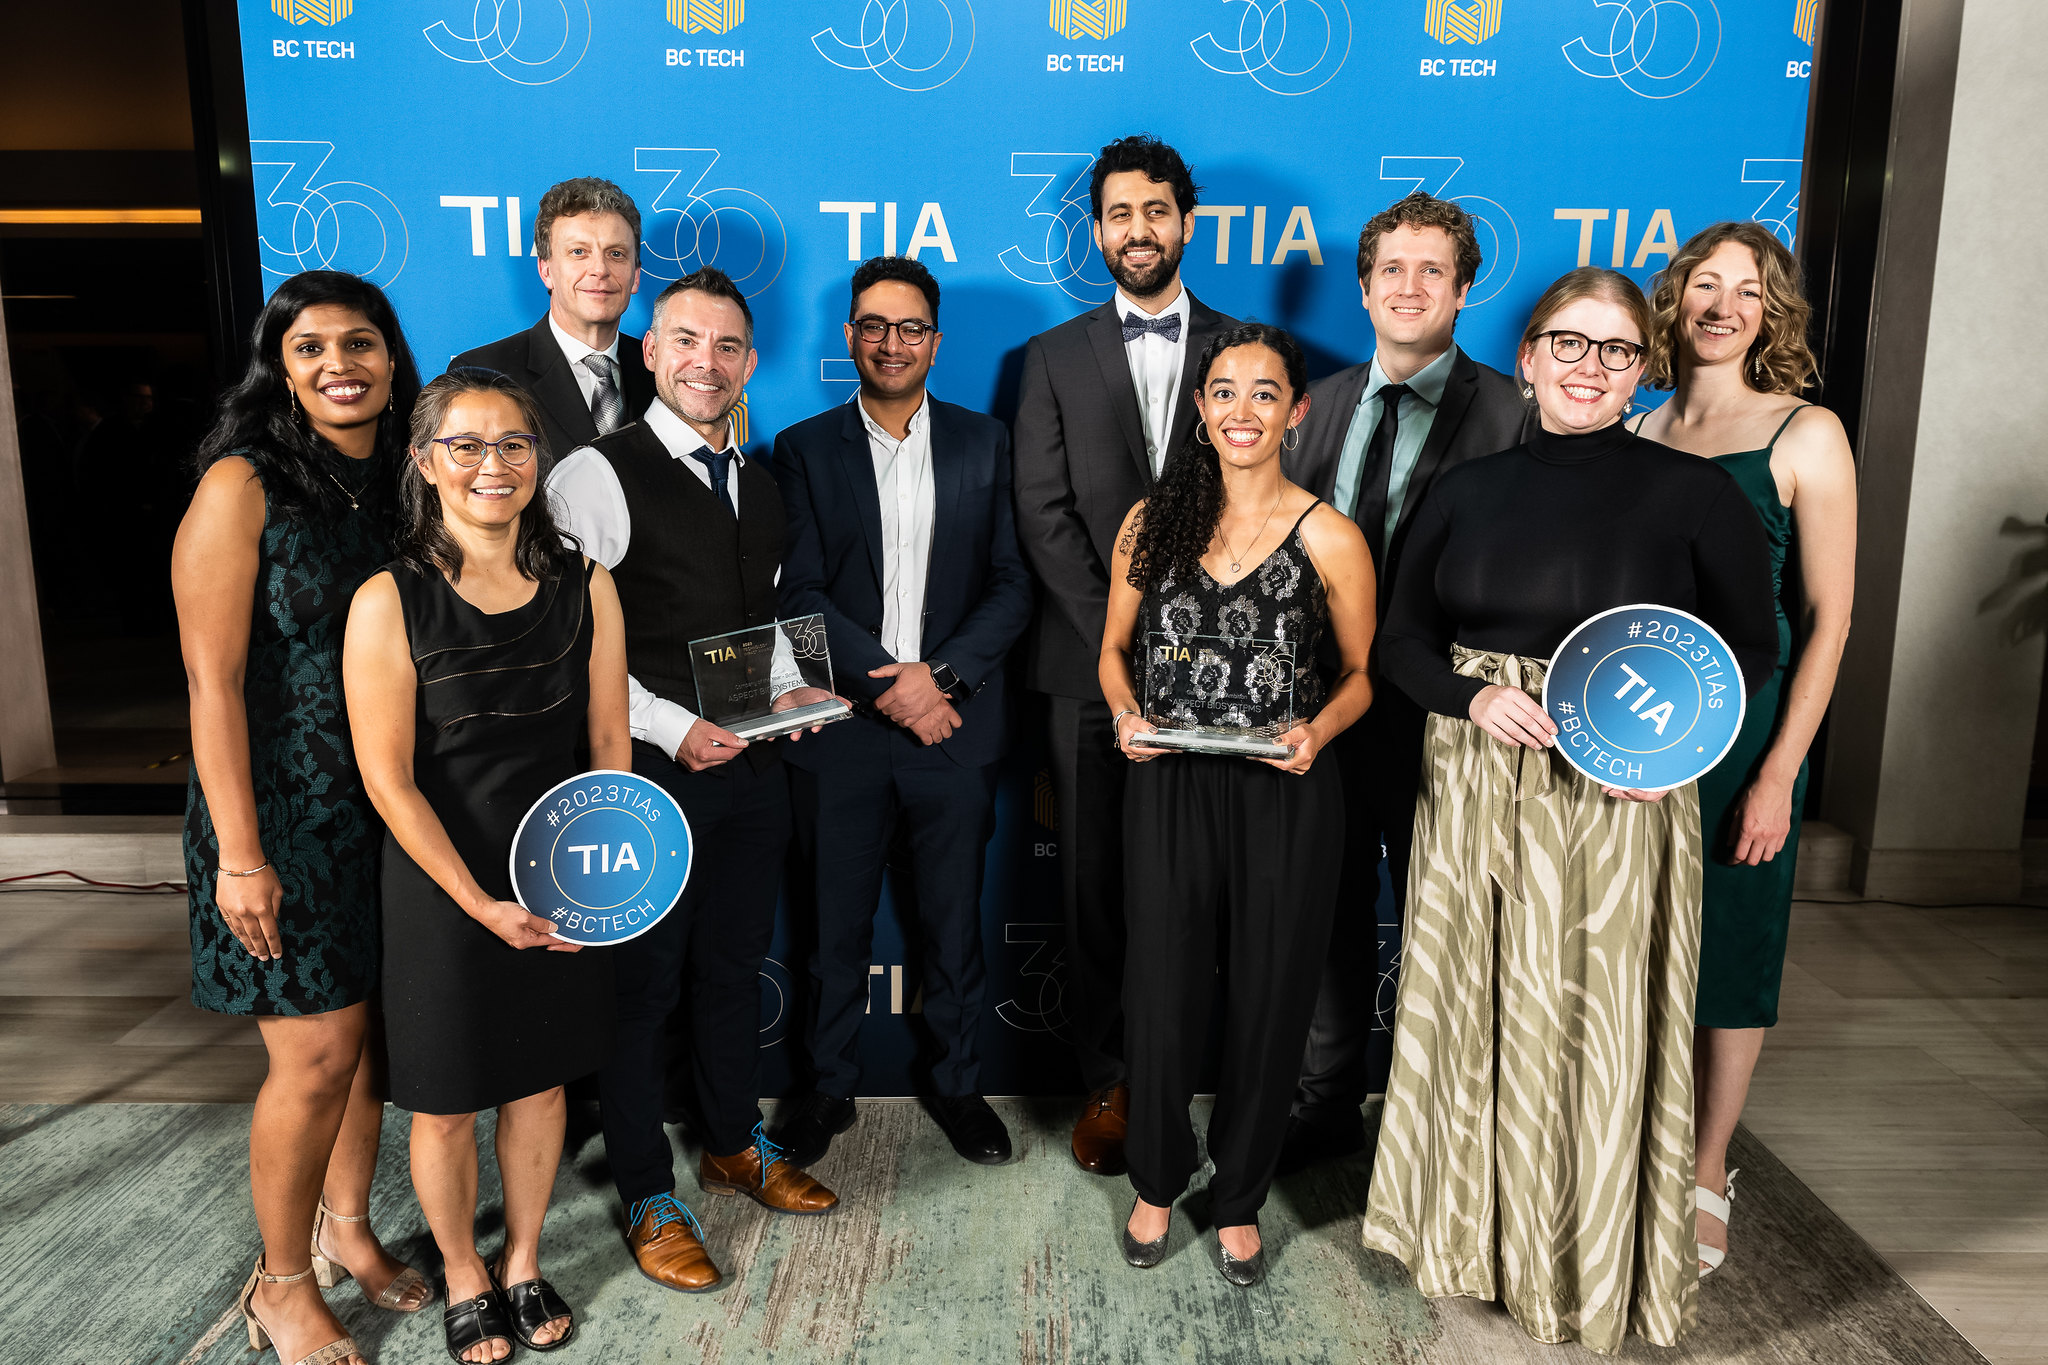 10 people from the Aspect Biosystem in formal attire, standing in front of a blue photo backdrop and holding two glass awards.